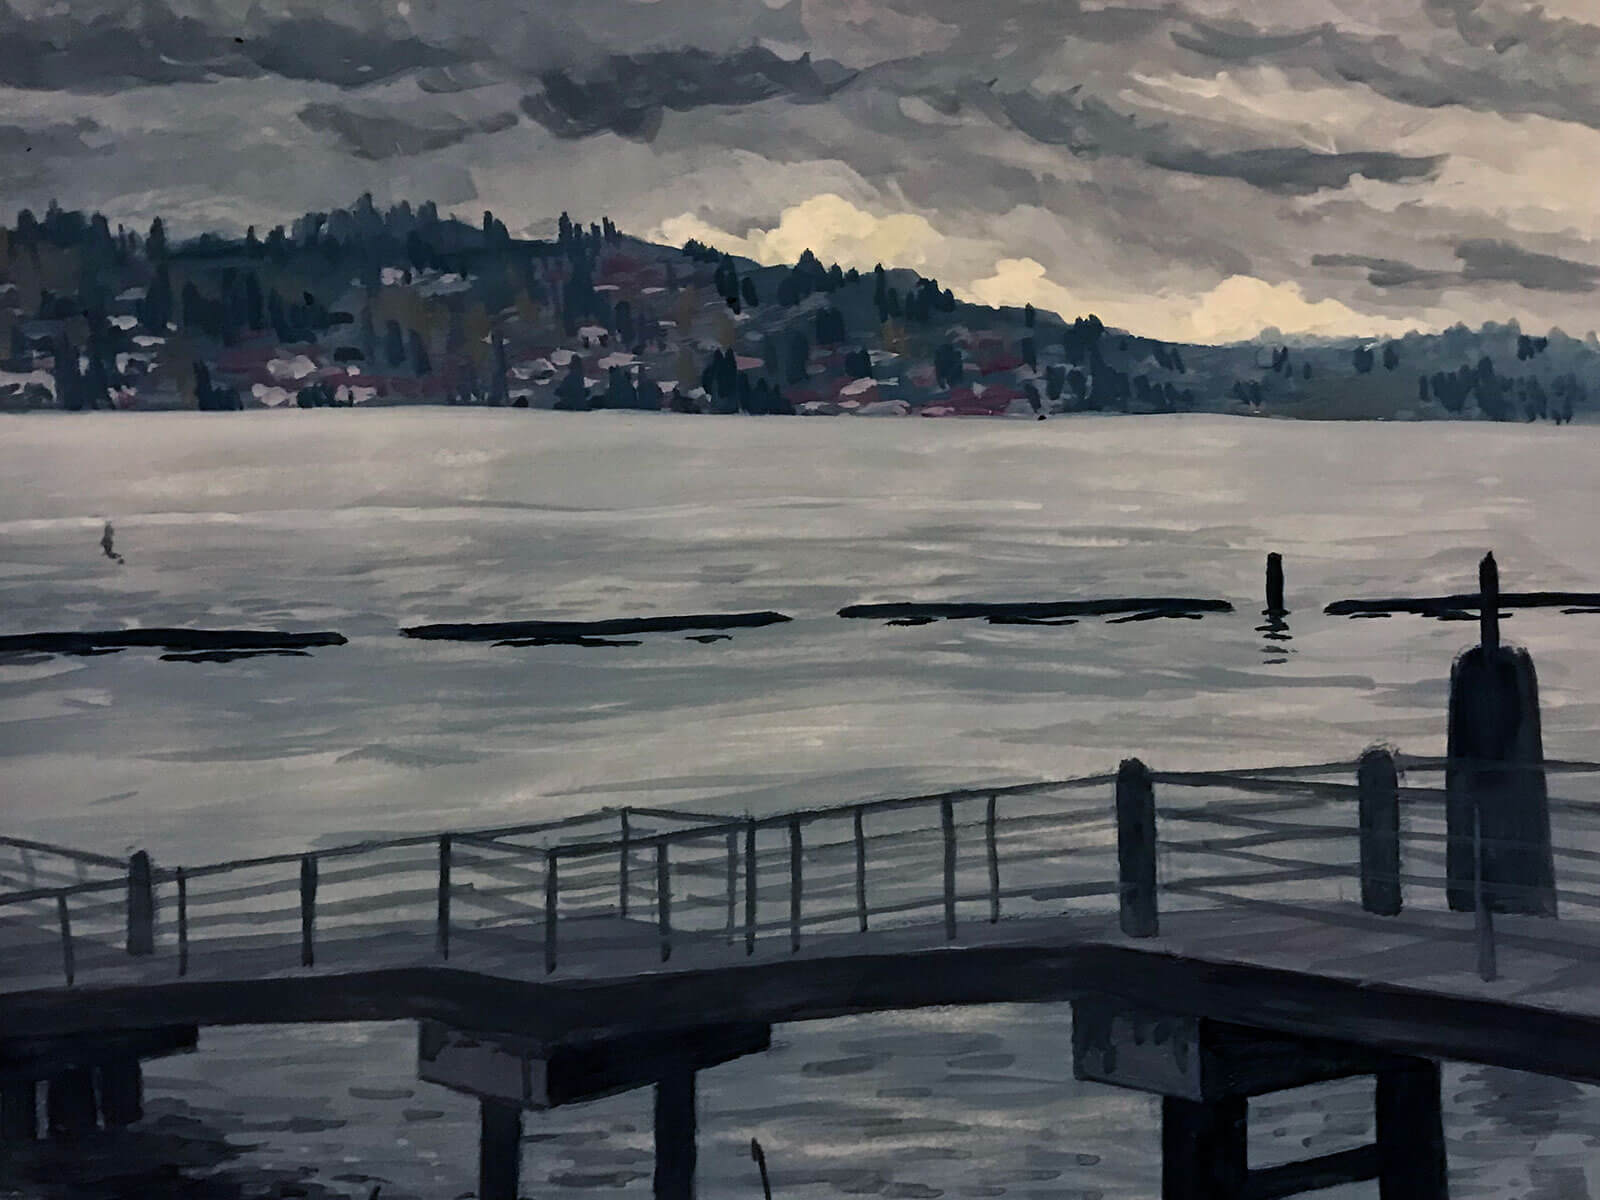 View of a dock and lake, houses and stormy gray skies in the distance